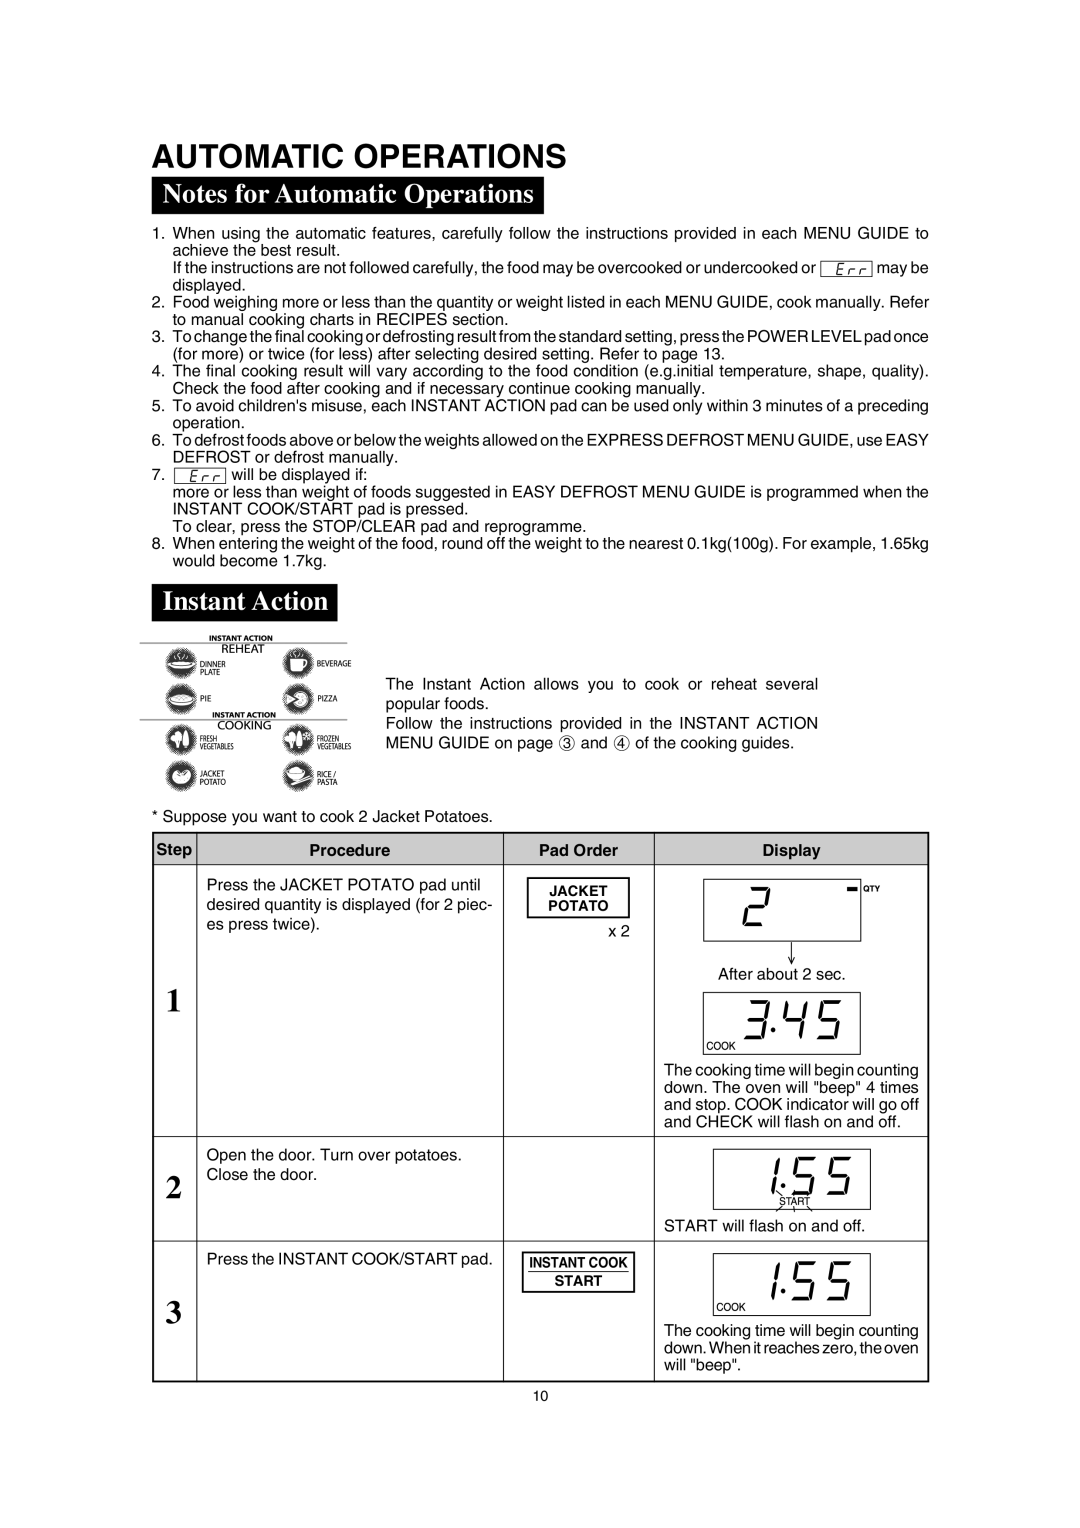 Sharp R-330J(W), R-330J(S) manual Notes for Automatic Operations, Instant Action 